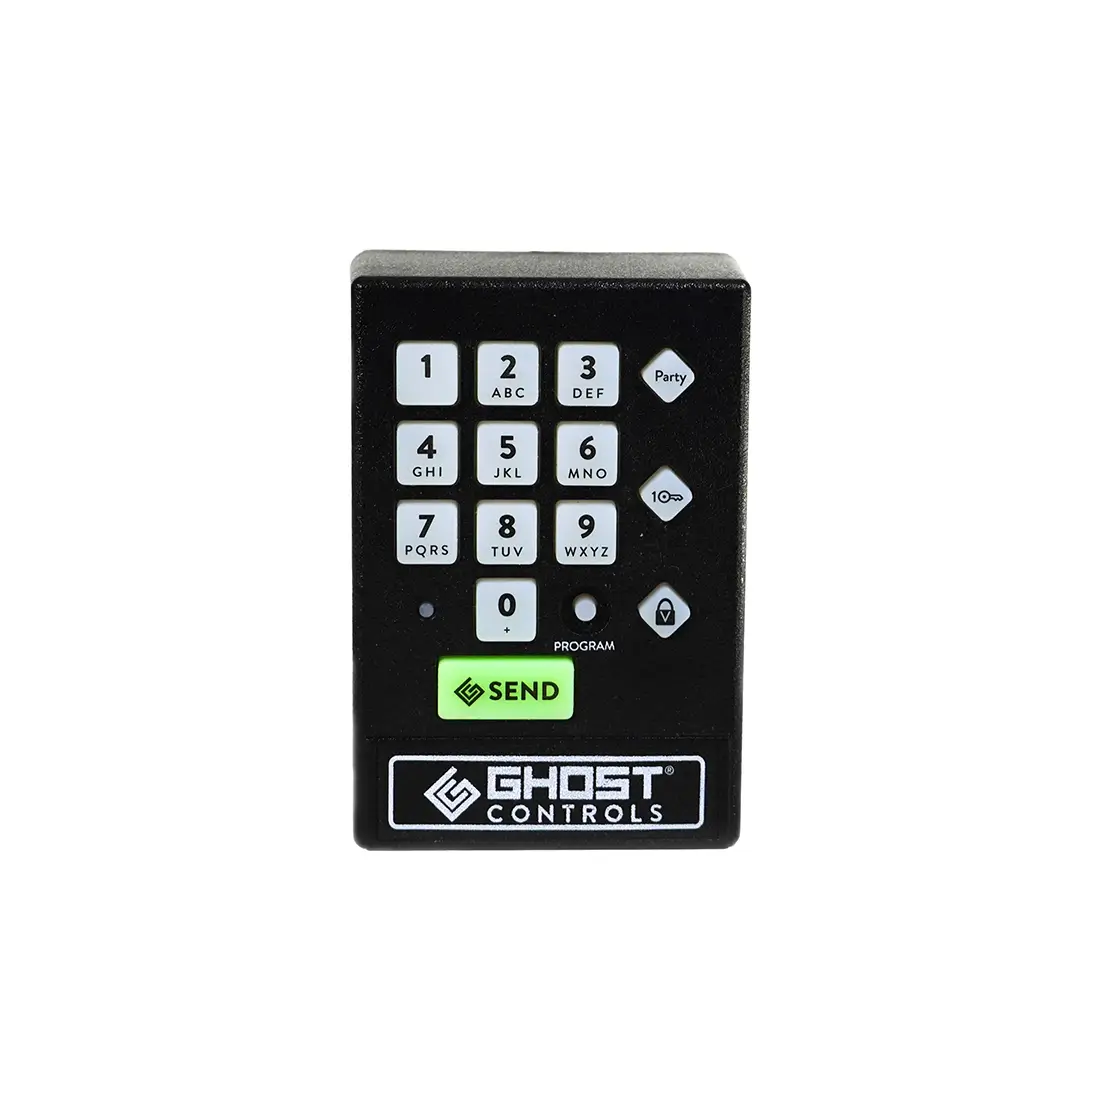 Can the wireless keypad be hard wired in?